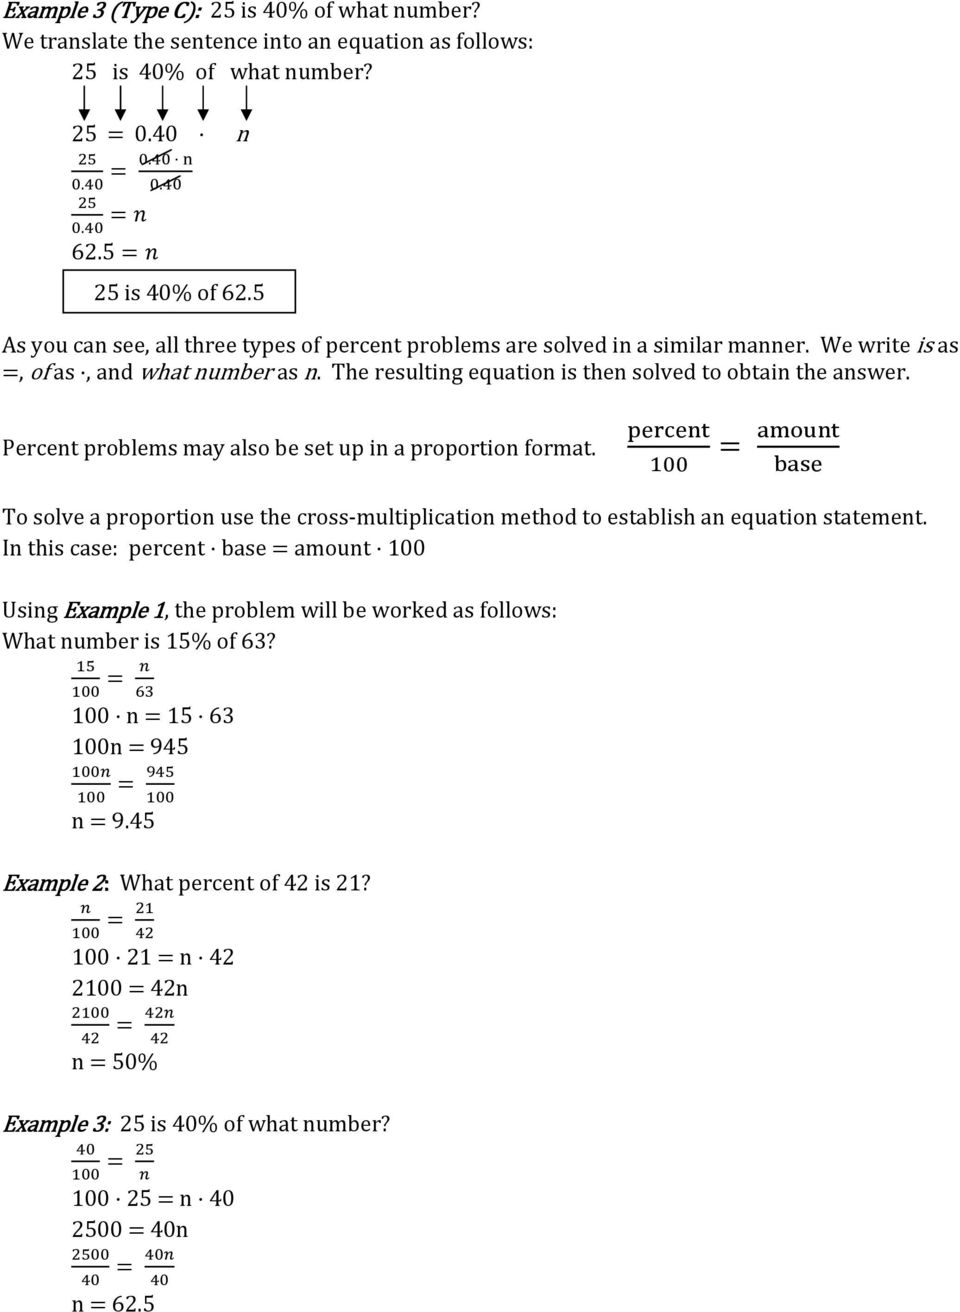 Percent problems may also be set up in a proportion format. = To solve a proportion use the cross-multiplication method to establish an equation statement.